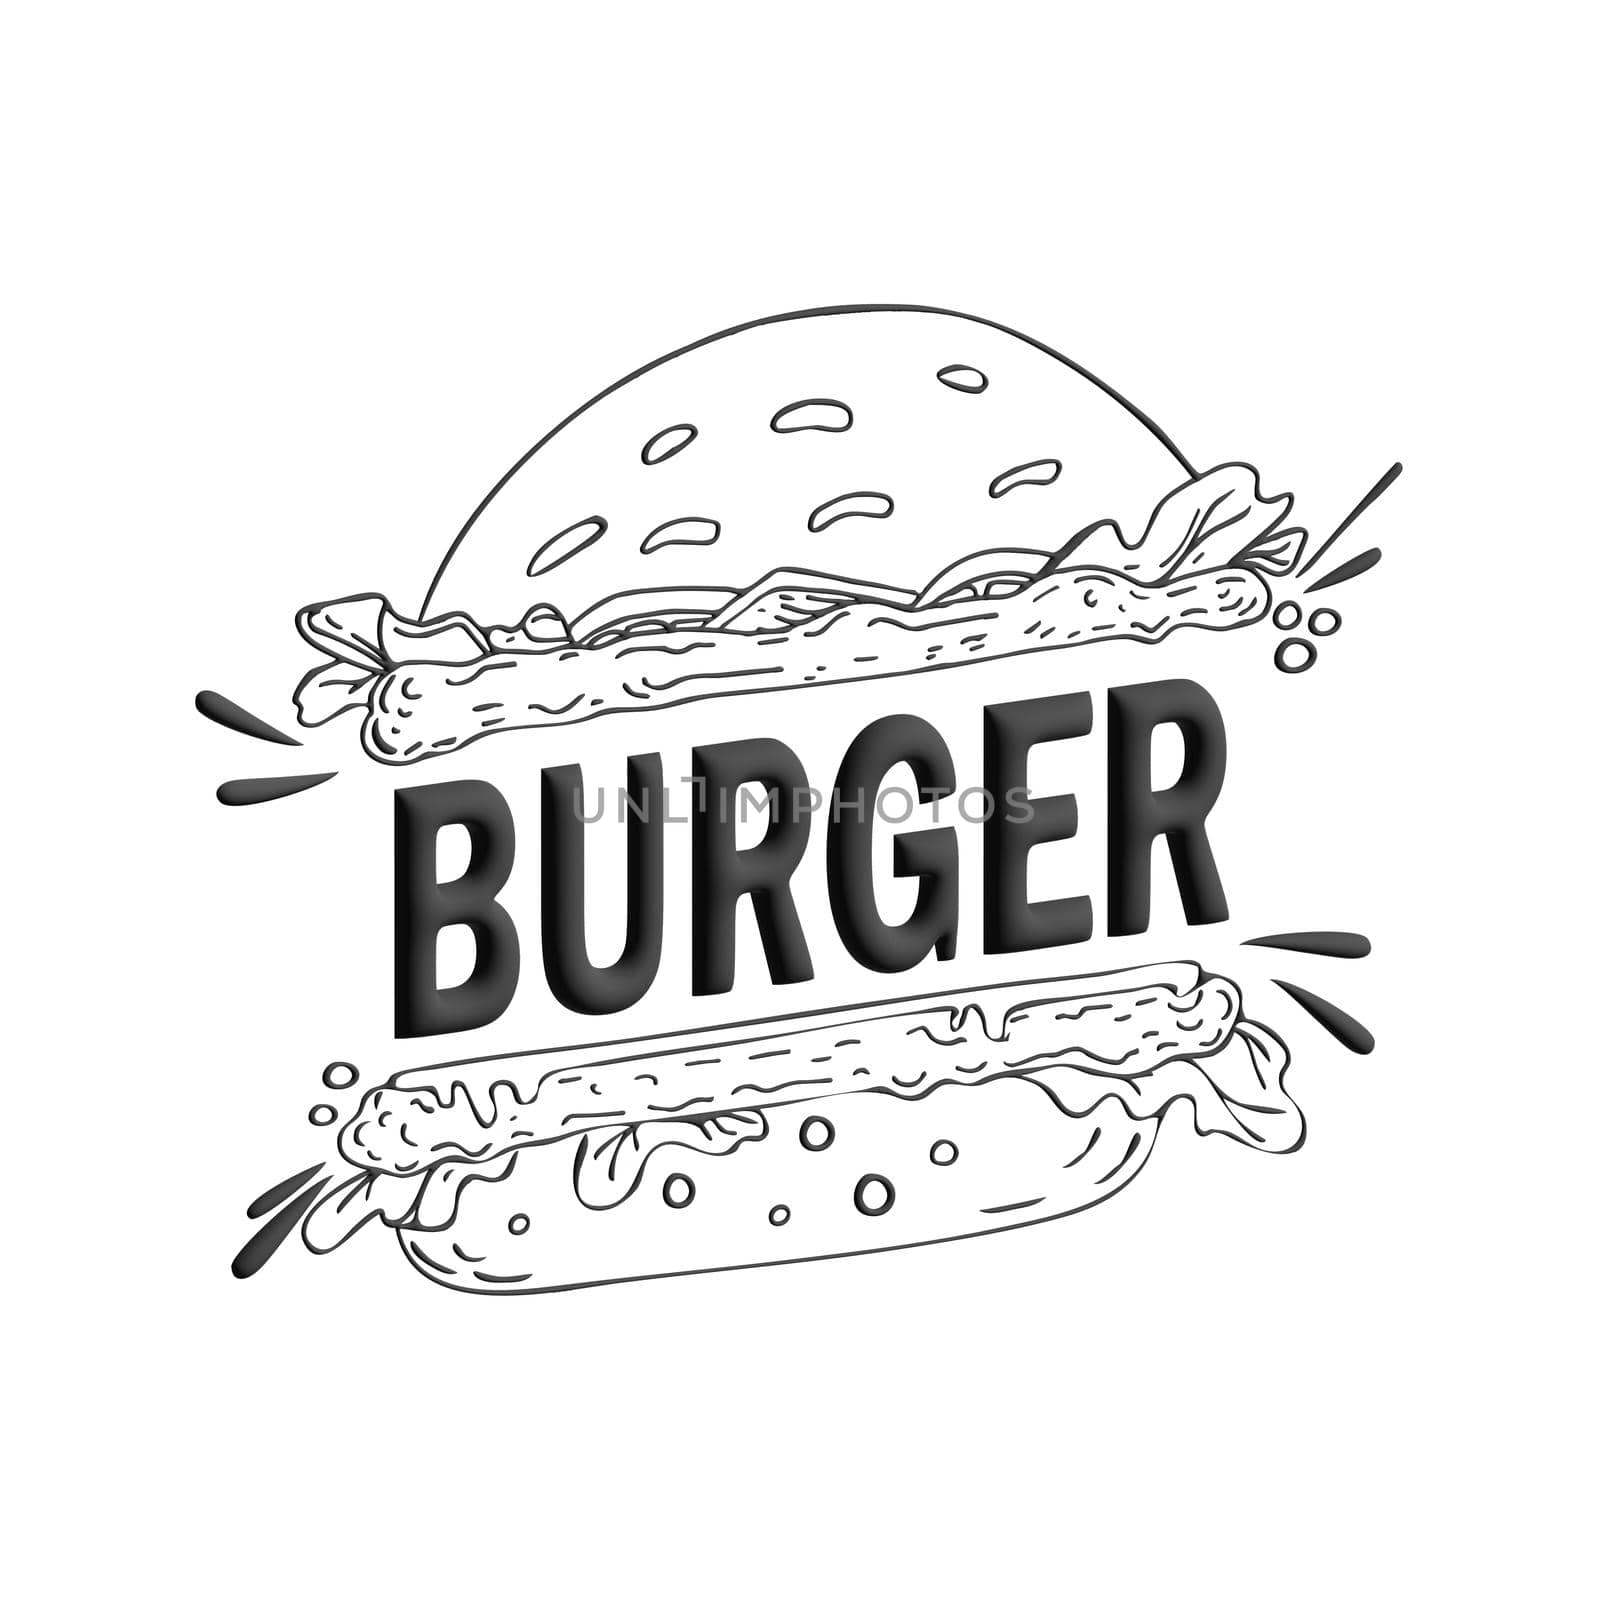 Text BURGER stylized as a hamburger. Stylish design for a brand, label or advertisement